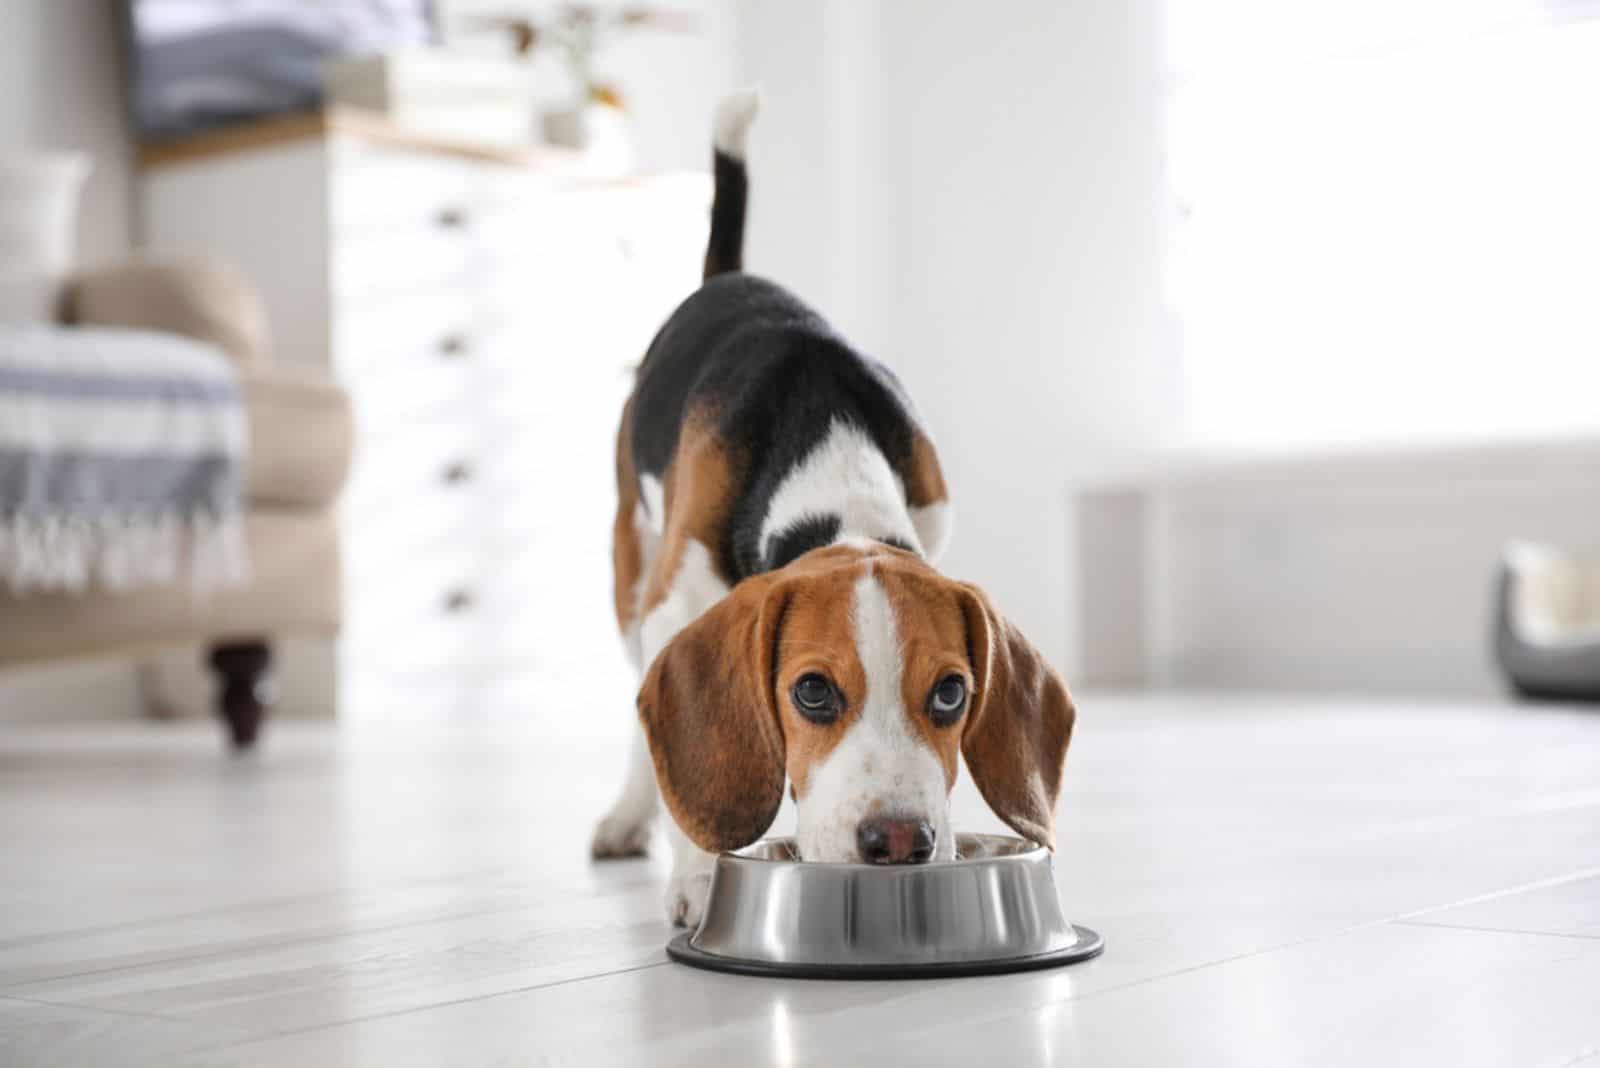 Beagle puppy eats food from a bowl